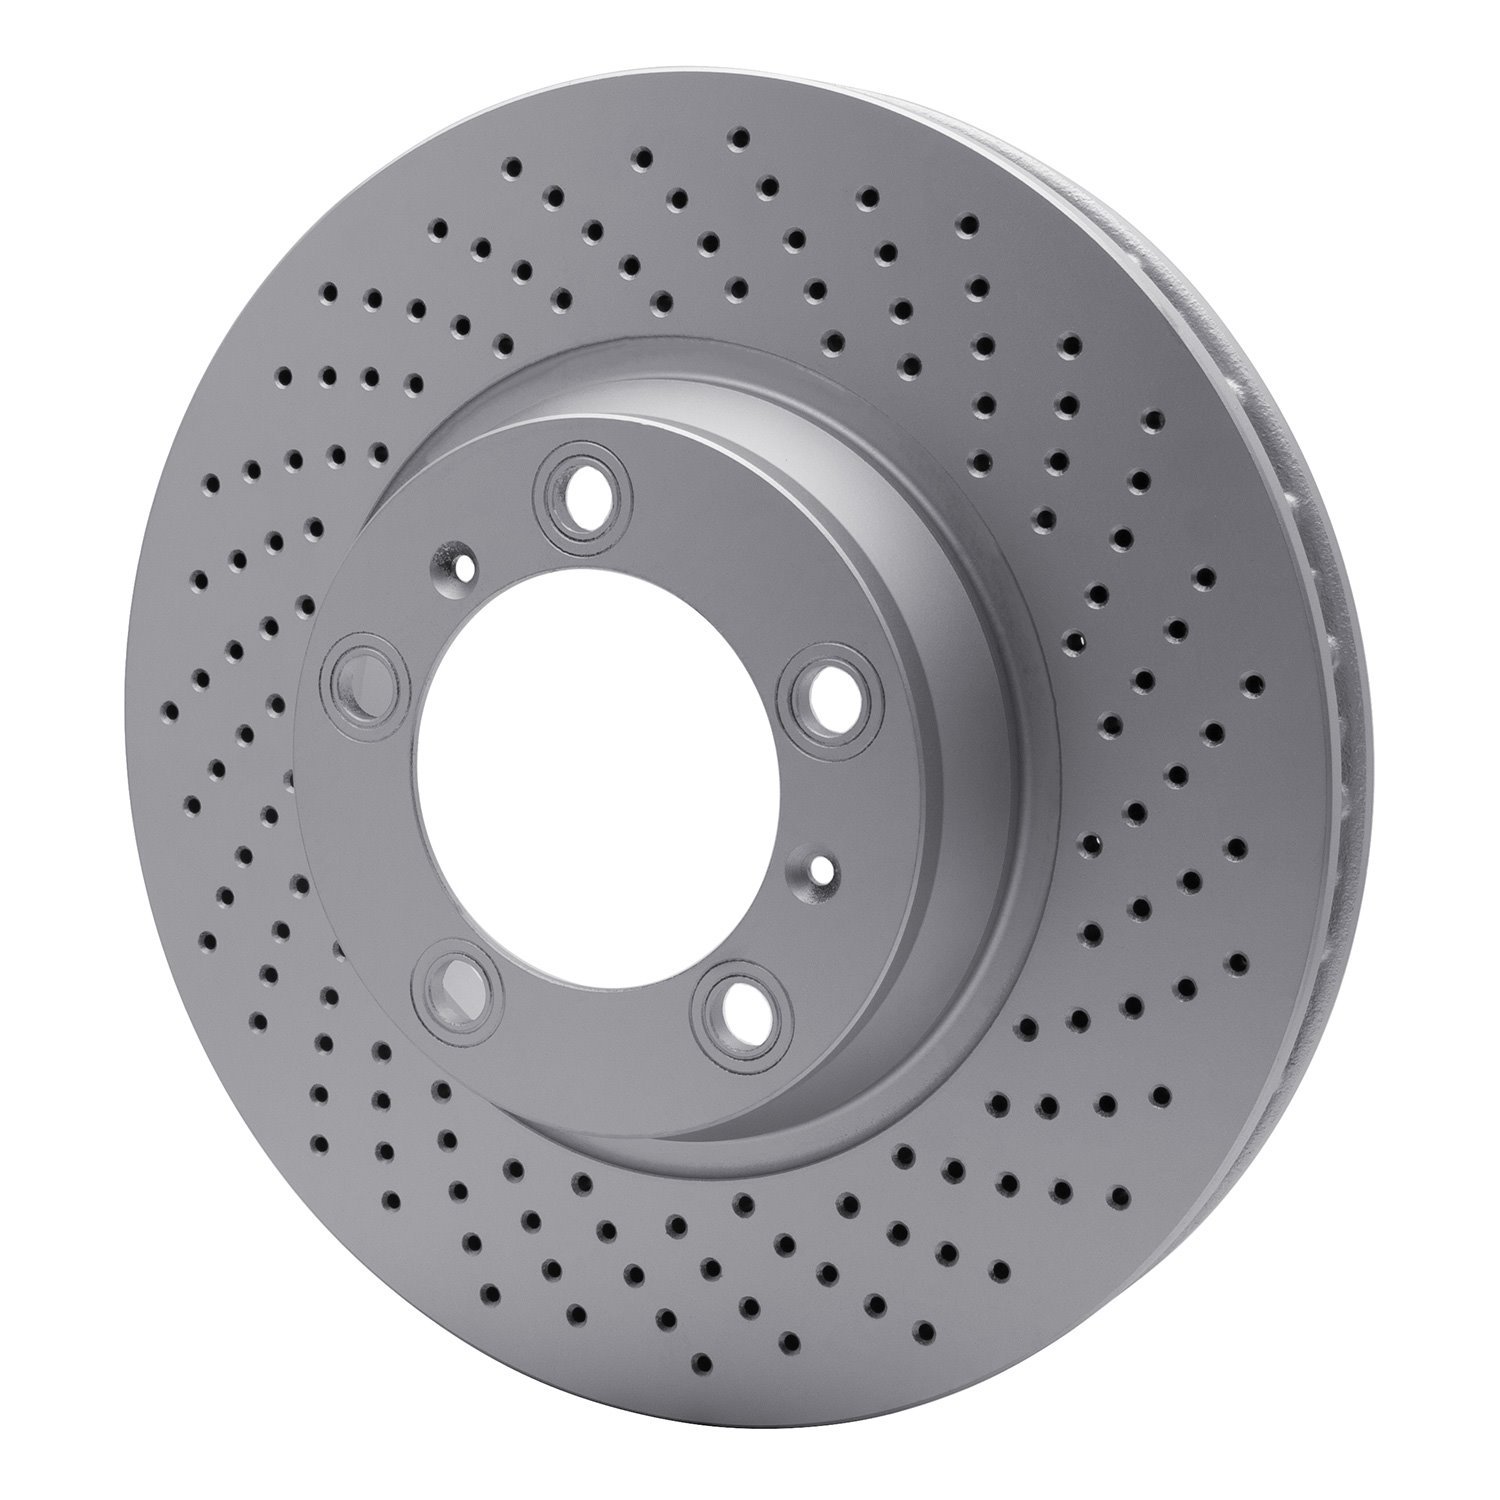 GEOSPEC Drilled Rotor [Coated], Fits Select Porsche